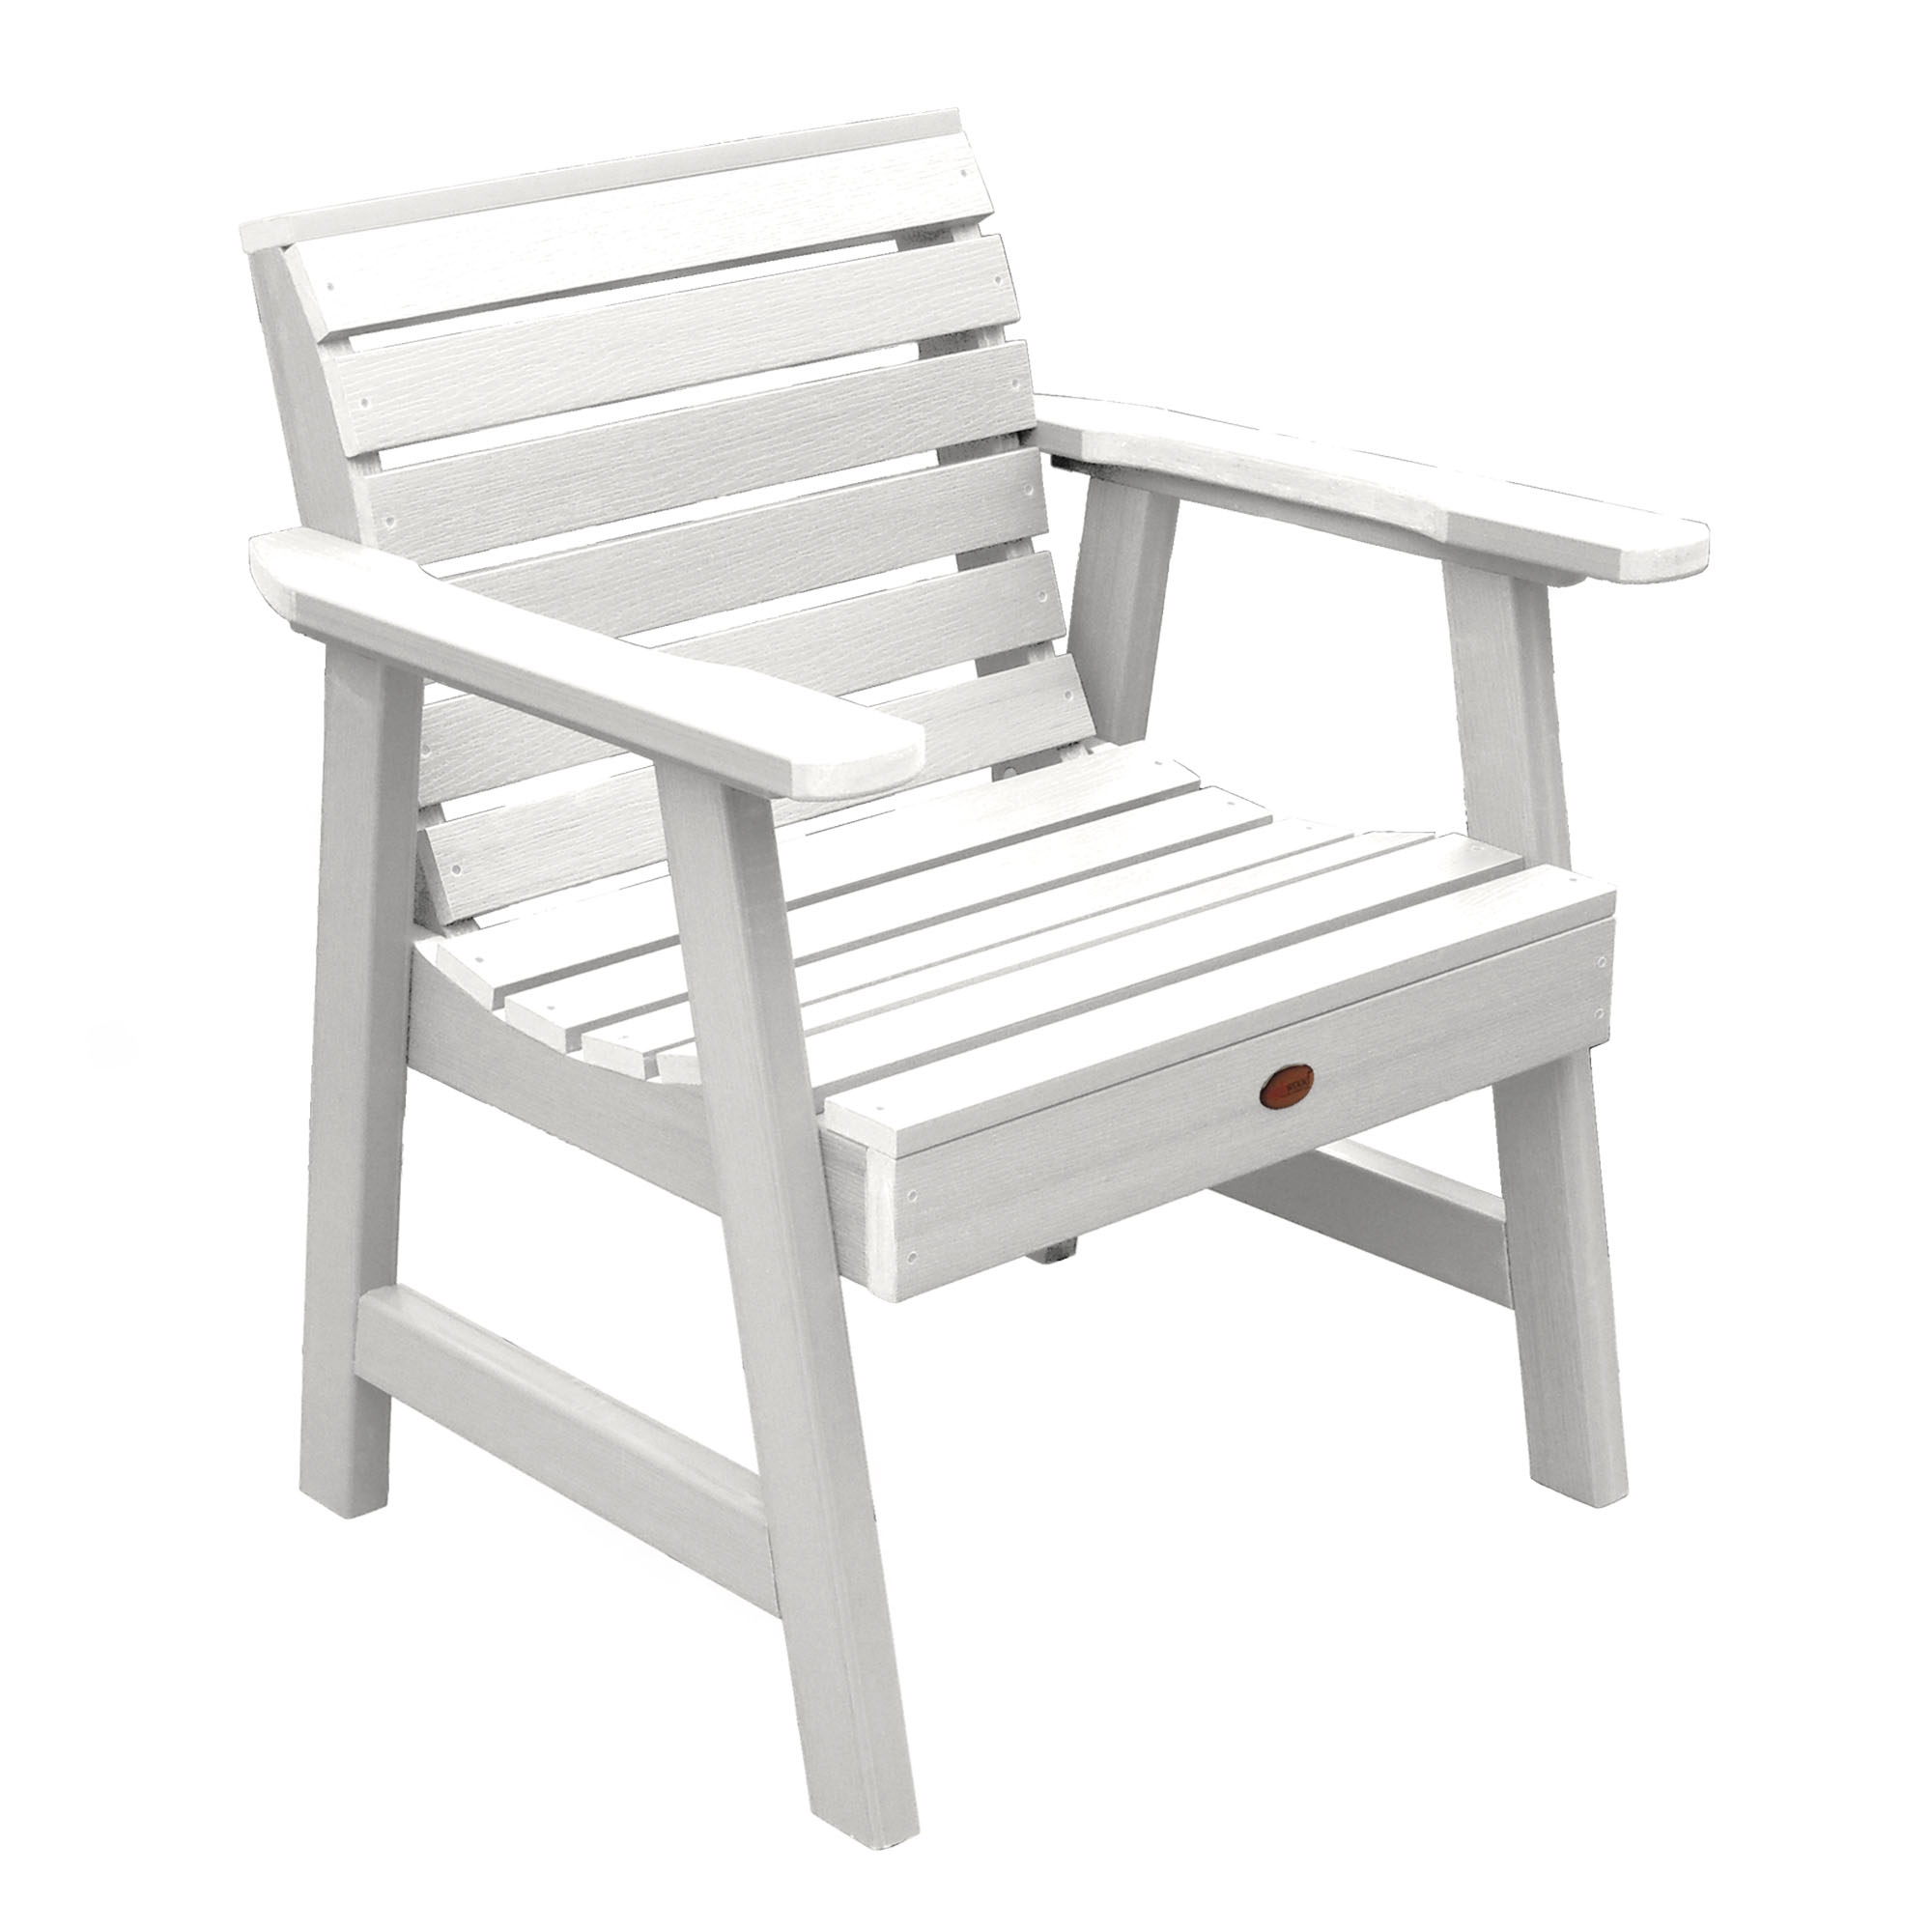 Highwood Weatherly Garden Chair - image 1 of 5